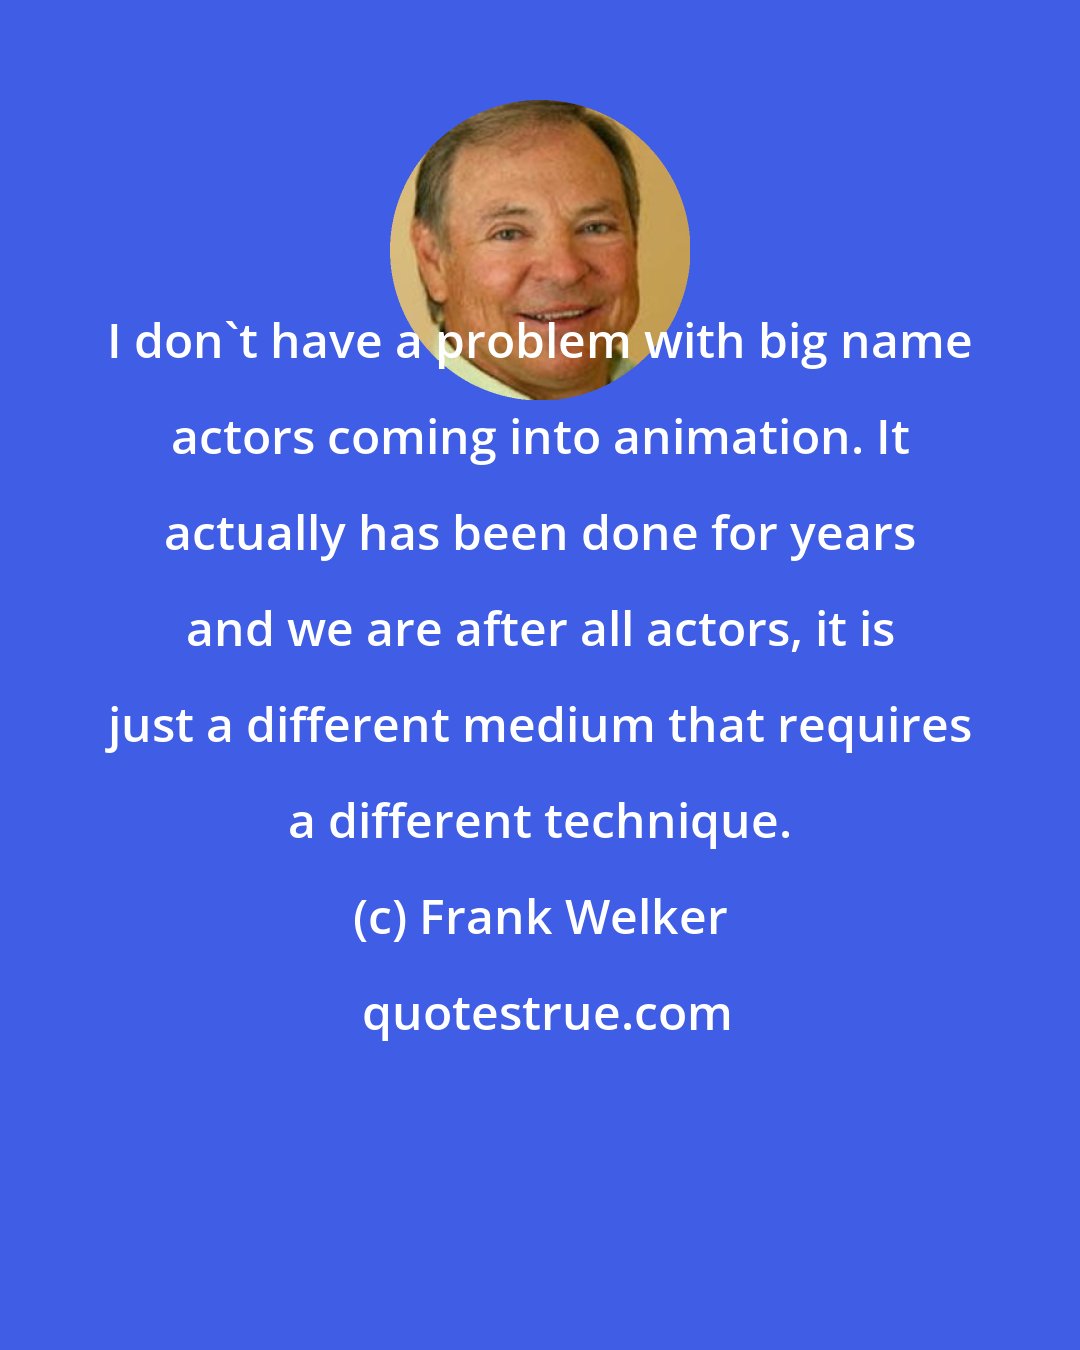 Frank Welker: I don't have a problem with big name actors coming into animation. It actually has been done for years and we are after all actors, it is just a different medium that requires a different technique.